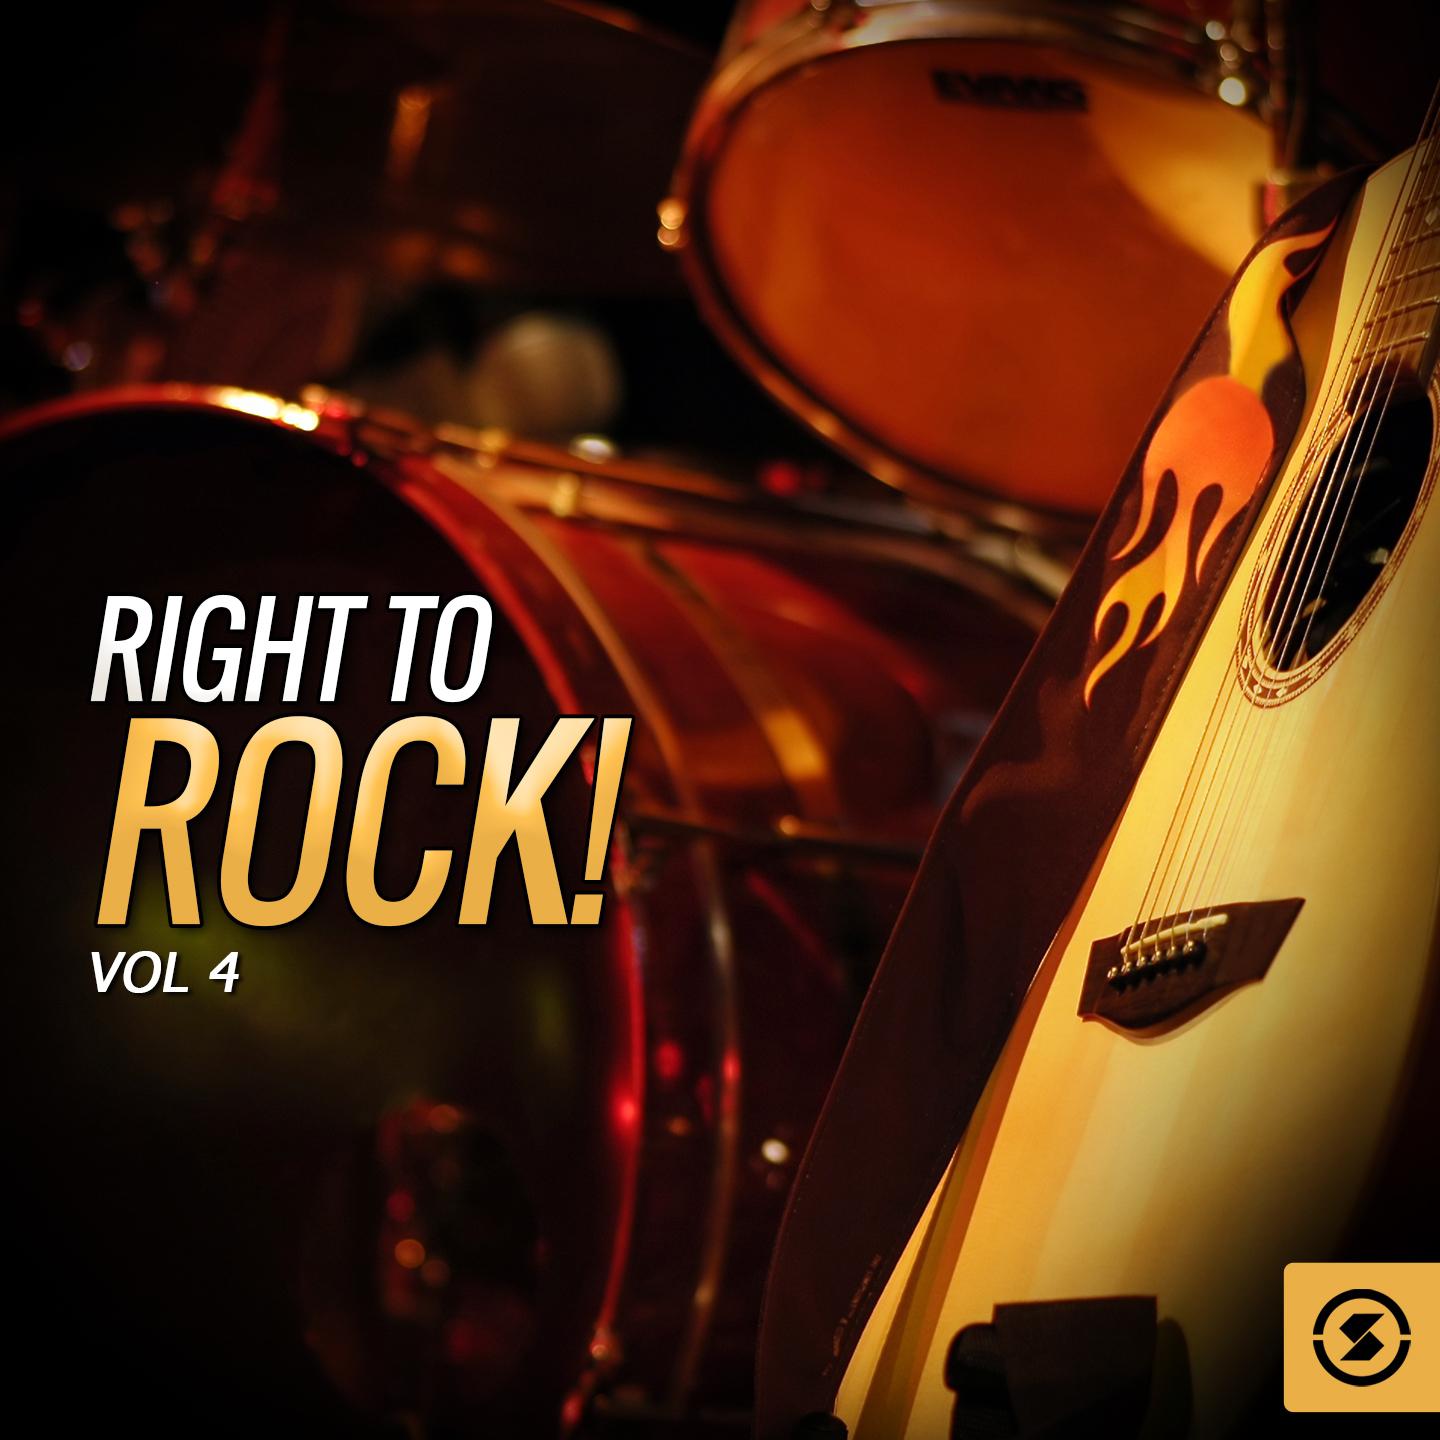 Right to Rock!, Vol. 4